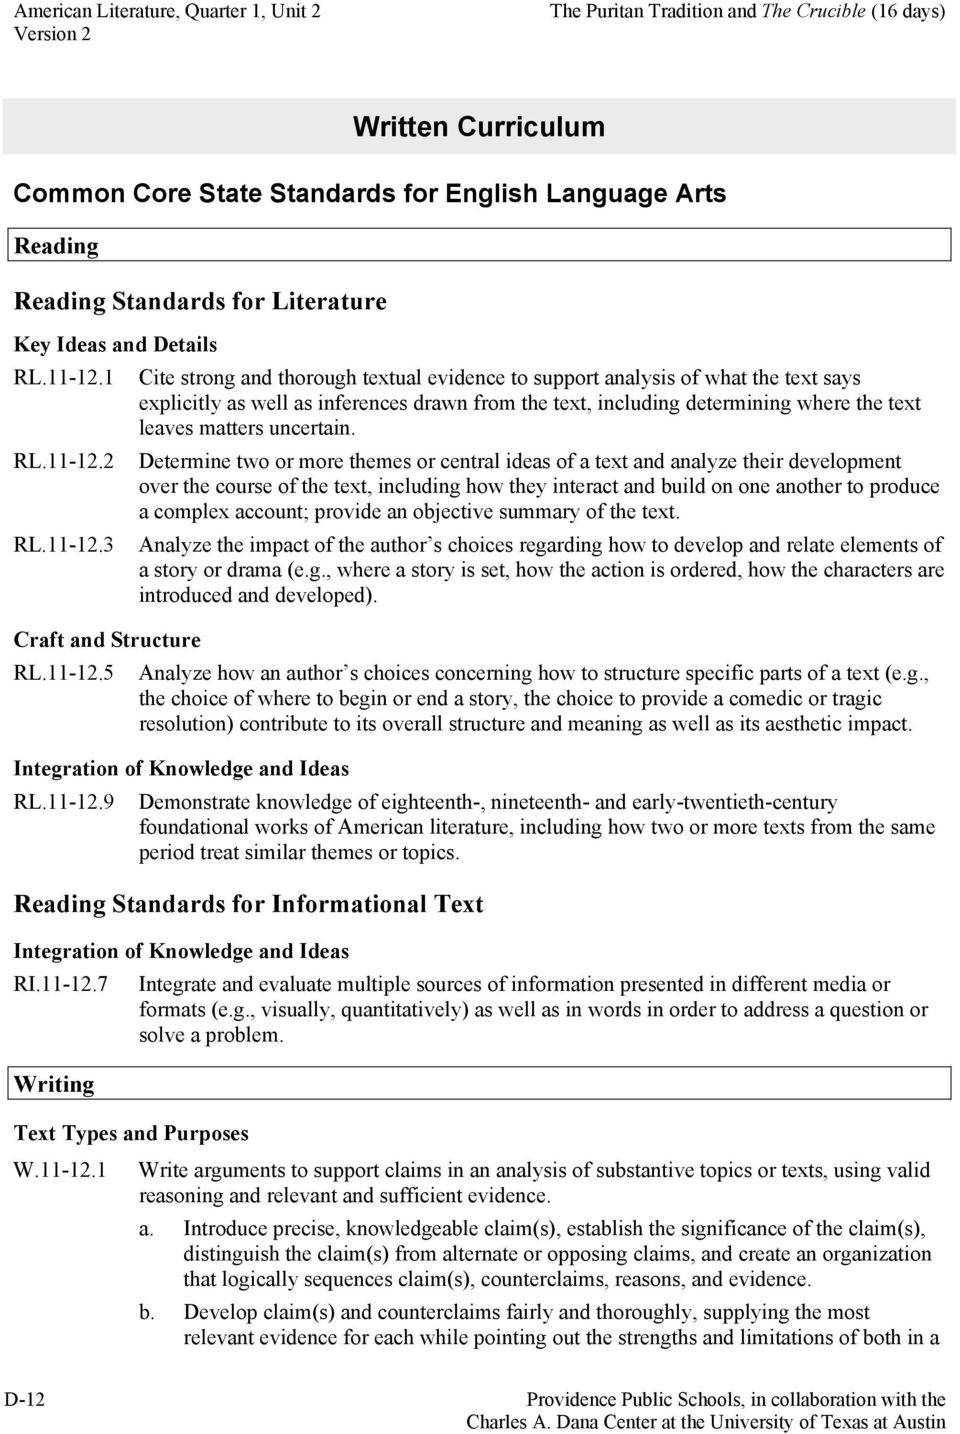 1 Cite strong and thorough textual evidence to support analysis of what the text says explicitly as well as inferences drawn from the text, including determining where the text leaves matters